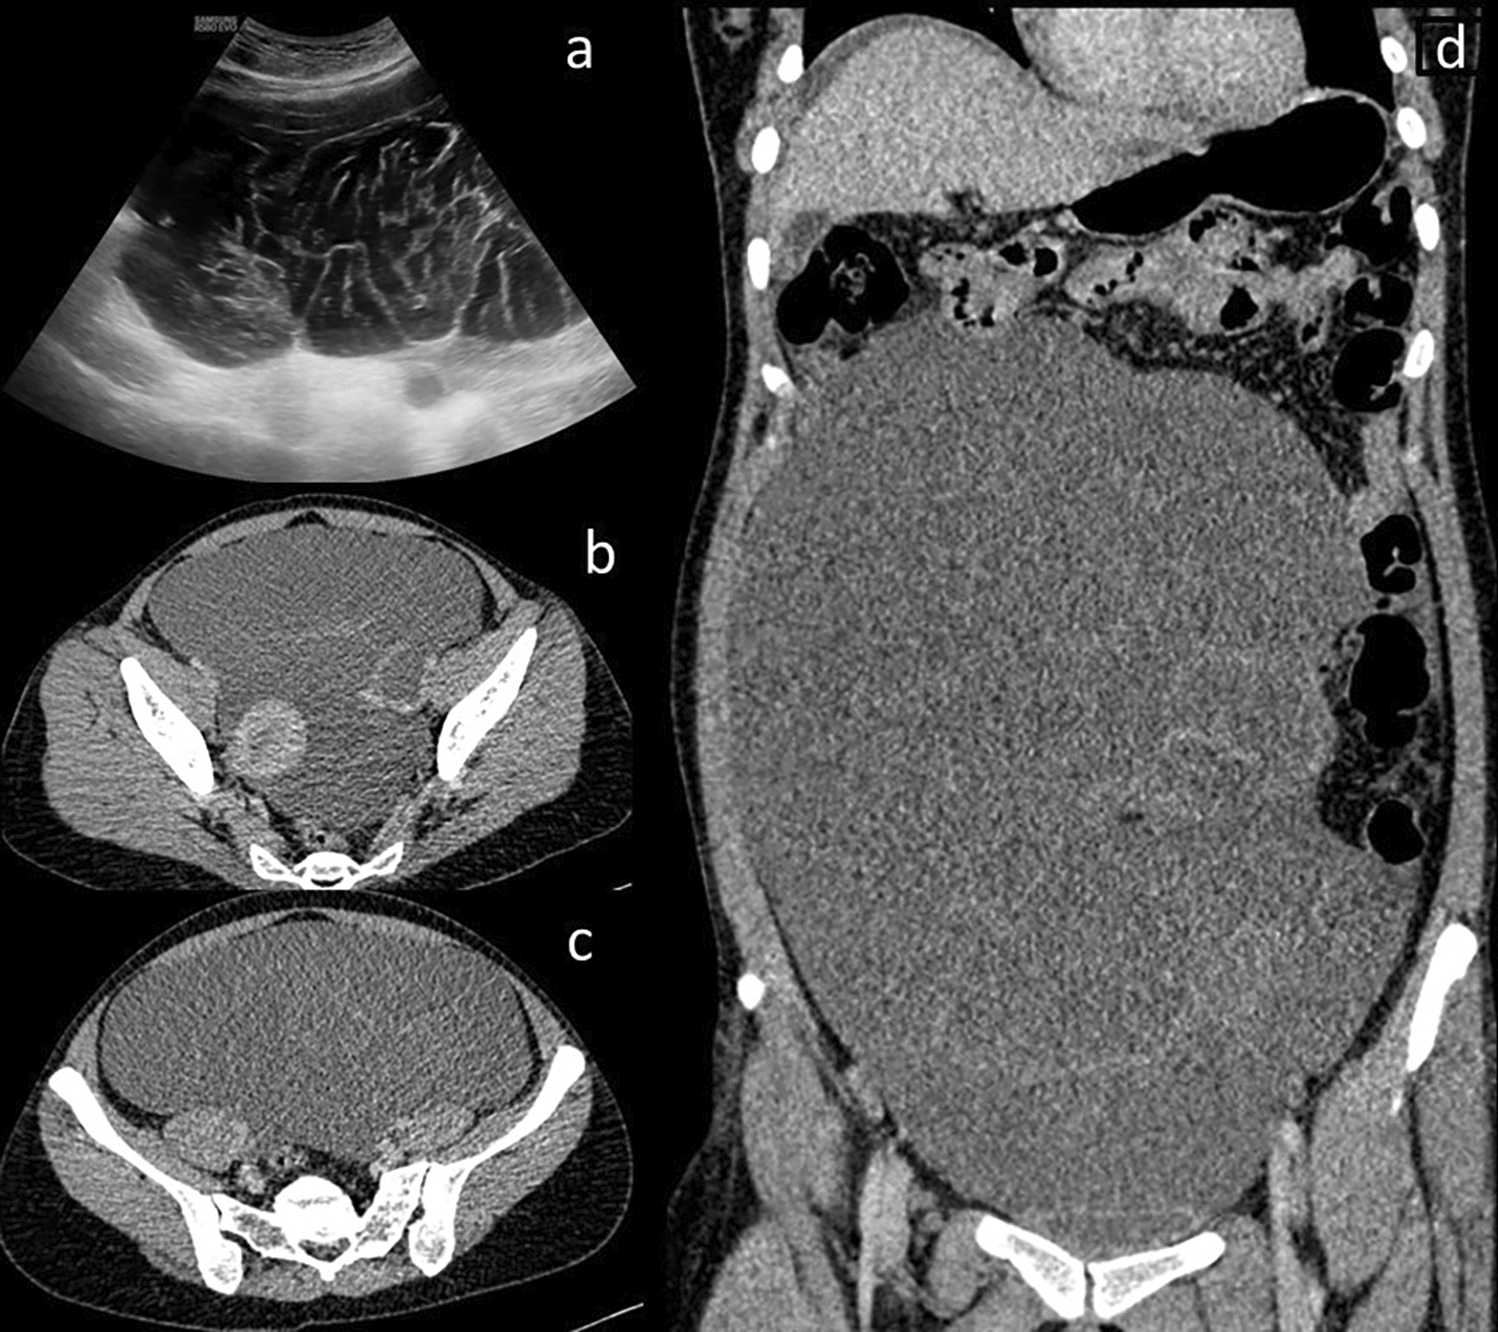 Bilateral Mucinous Cystic Ovarian Tumours: Beware of an Appendiceal Neoplasm Hiding Behind the Veil